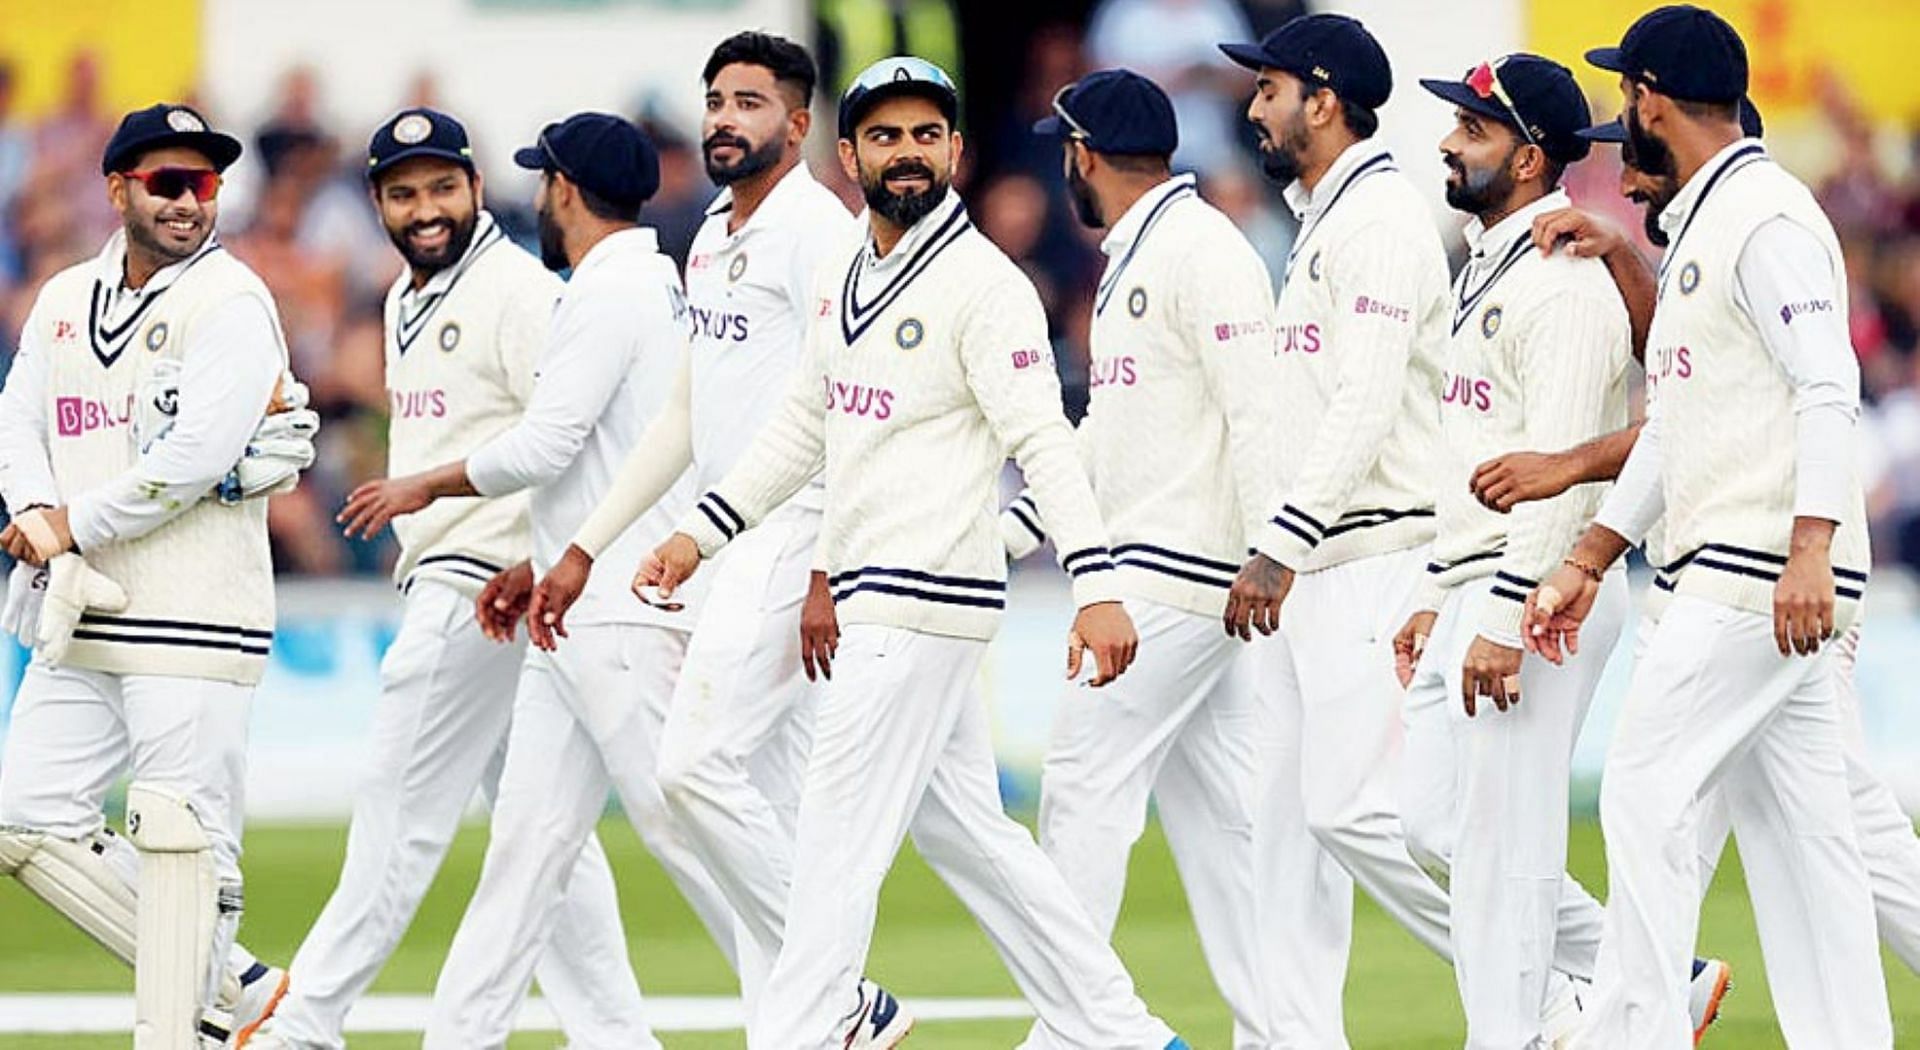 Indian players will hope to make a smooth transition from the IPL to Test cricket in England